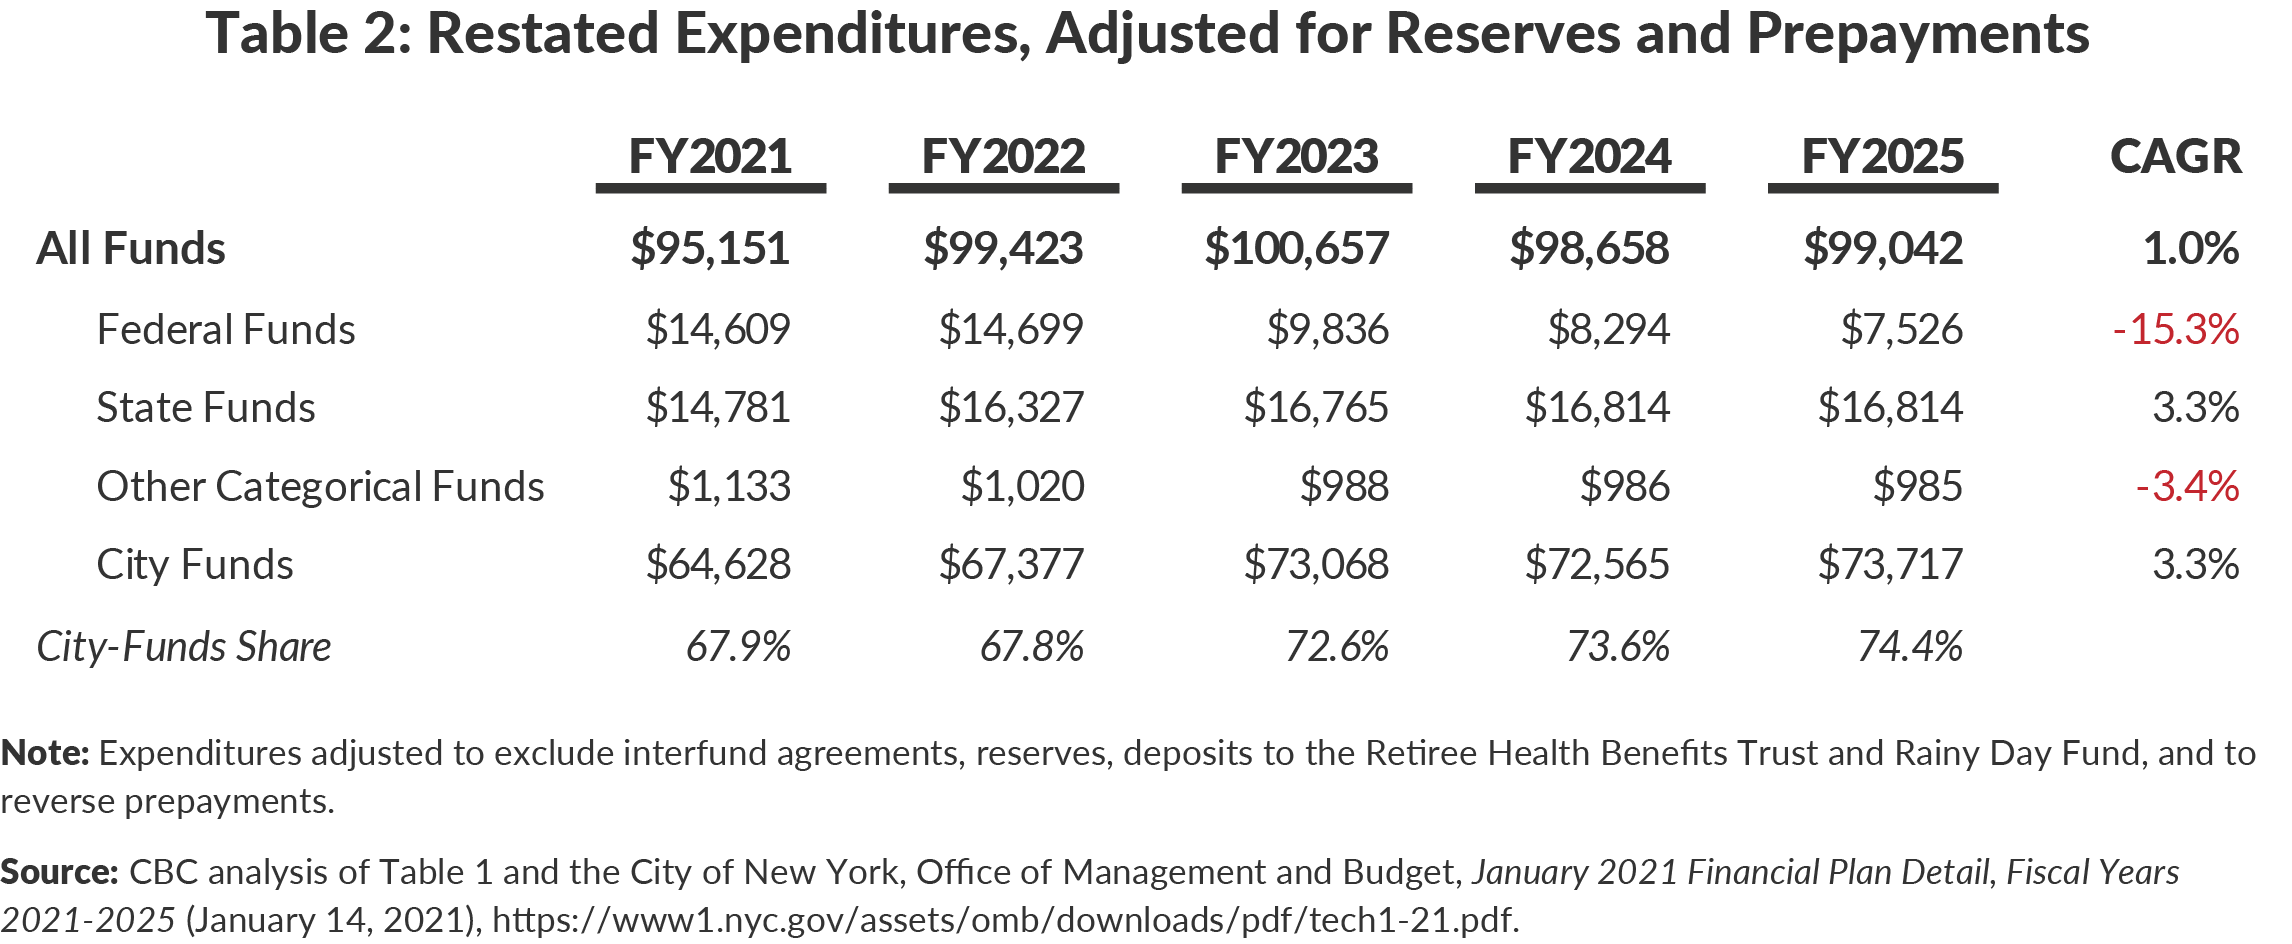 Table 2: Restated expenditures, adjusted for reserves and prepayment